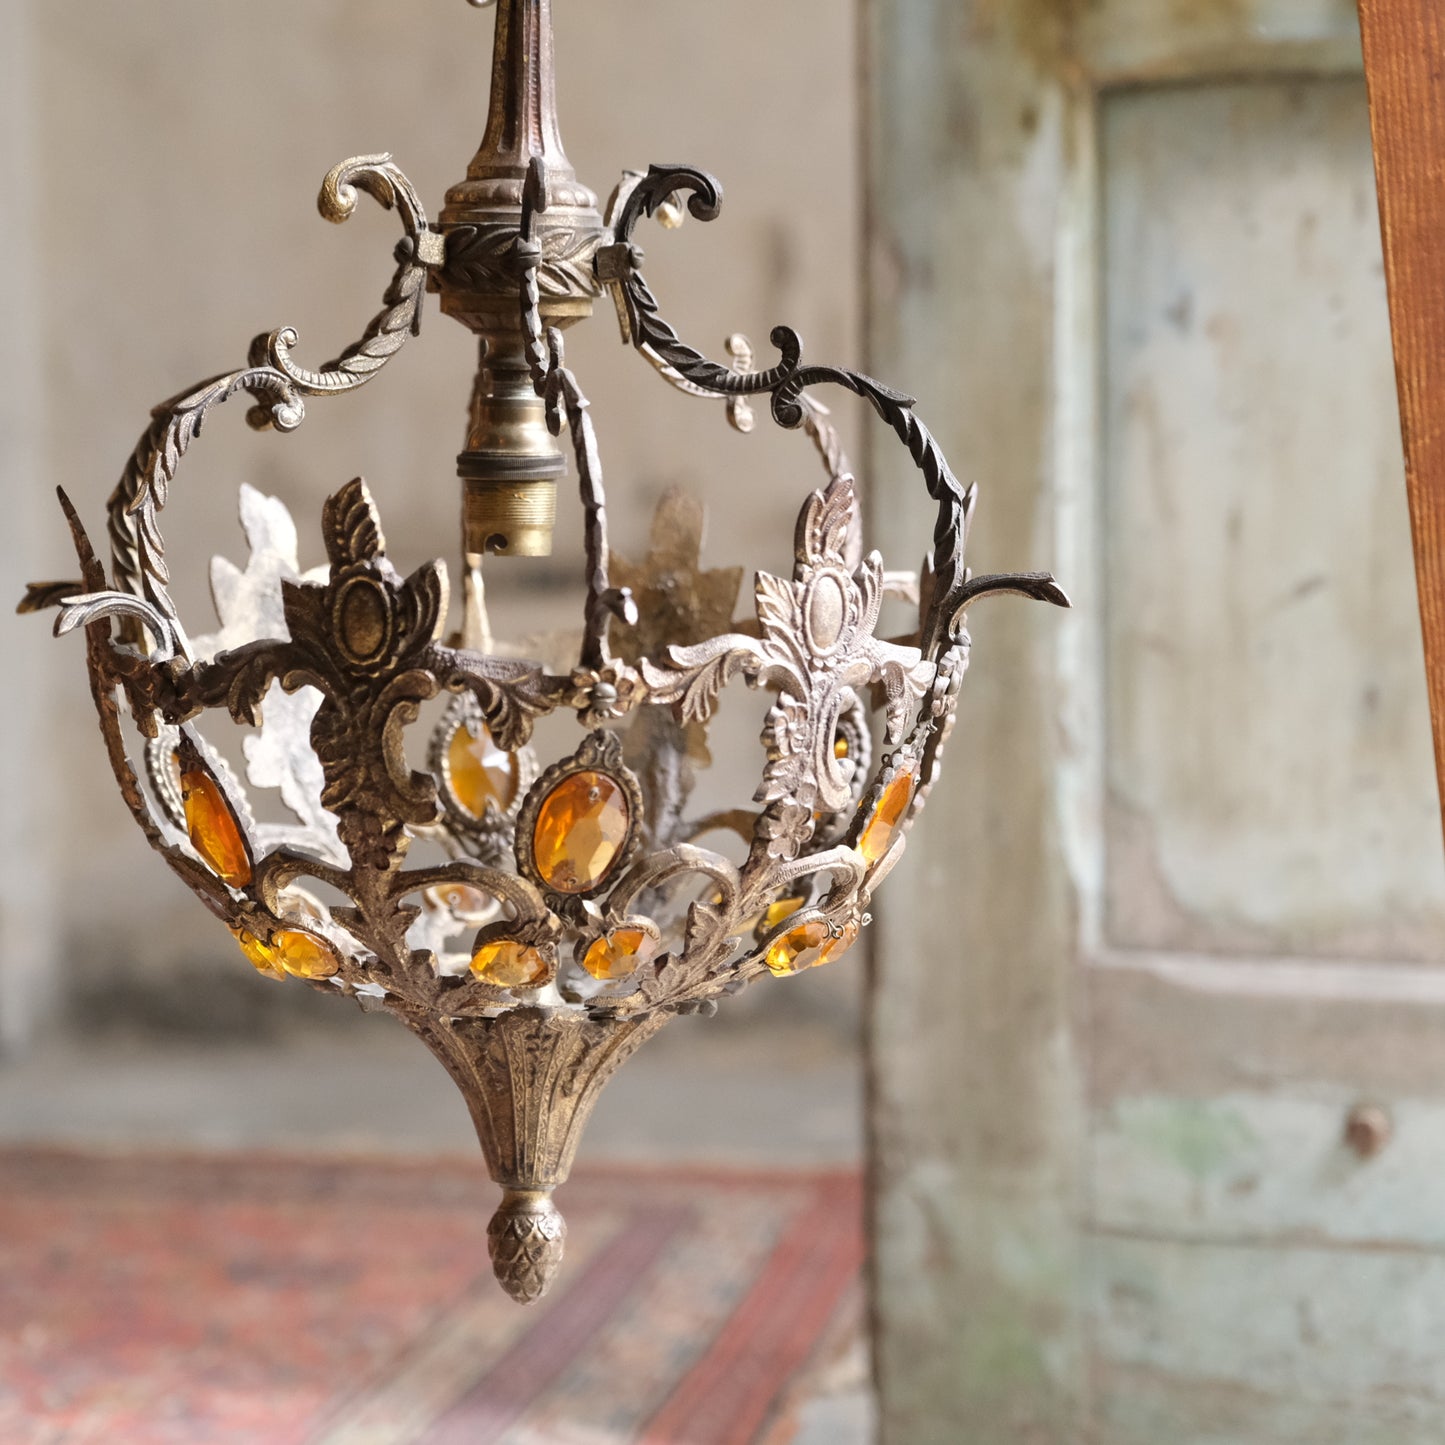 Cast Brass Lamp fitting with Amber Coloured Glass Beads